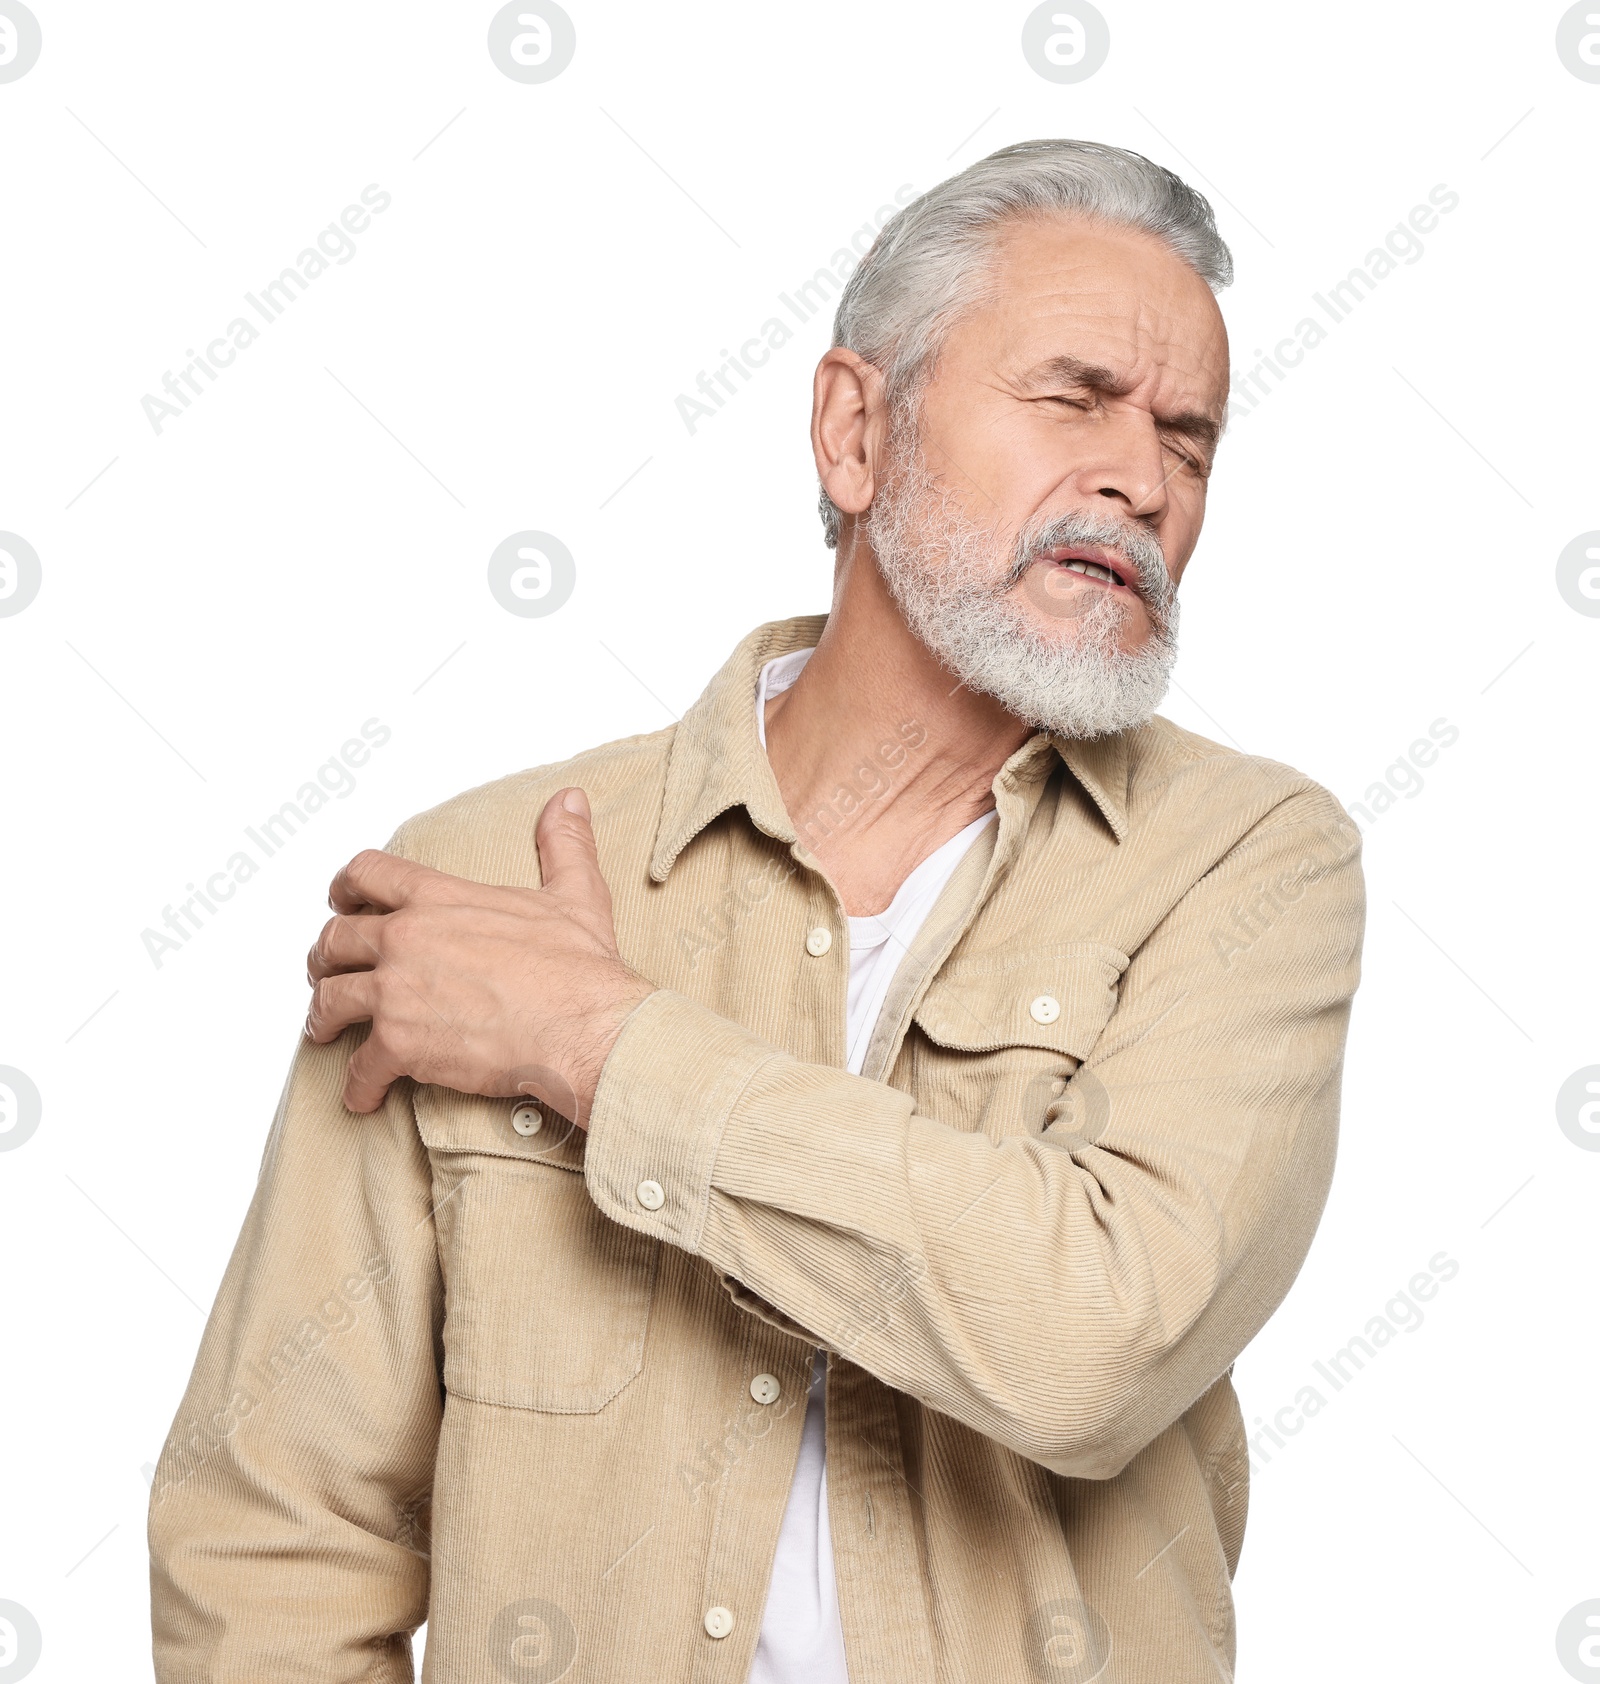 Photo of Arthritis symptoms. Man suffering from pain in shoulder on white background